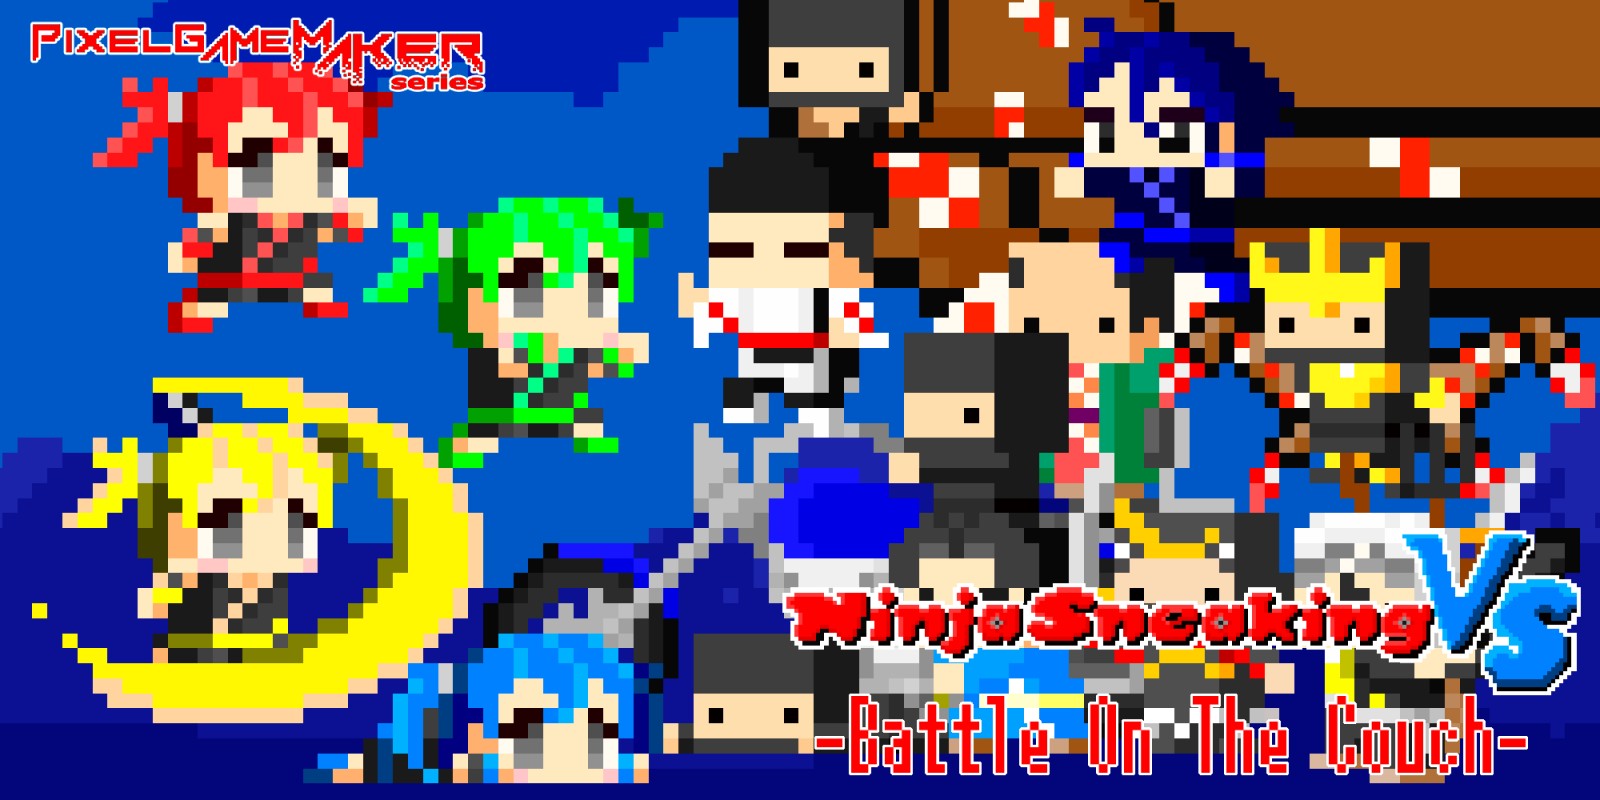 Pixel Game Maker Series Ninja Sneaking VS: Battle On The Couch